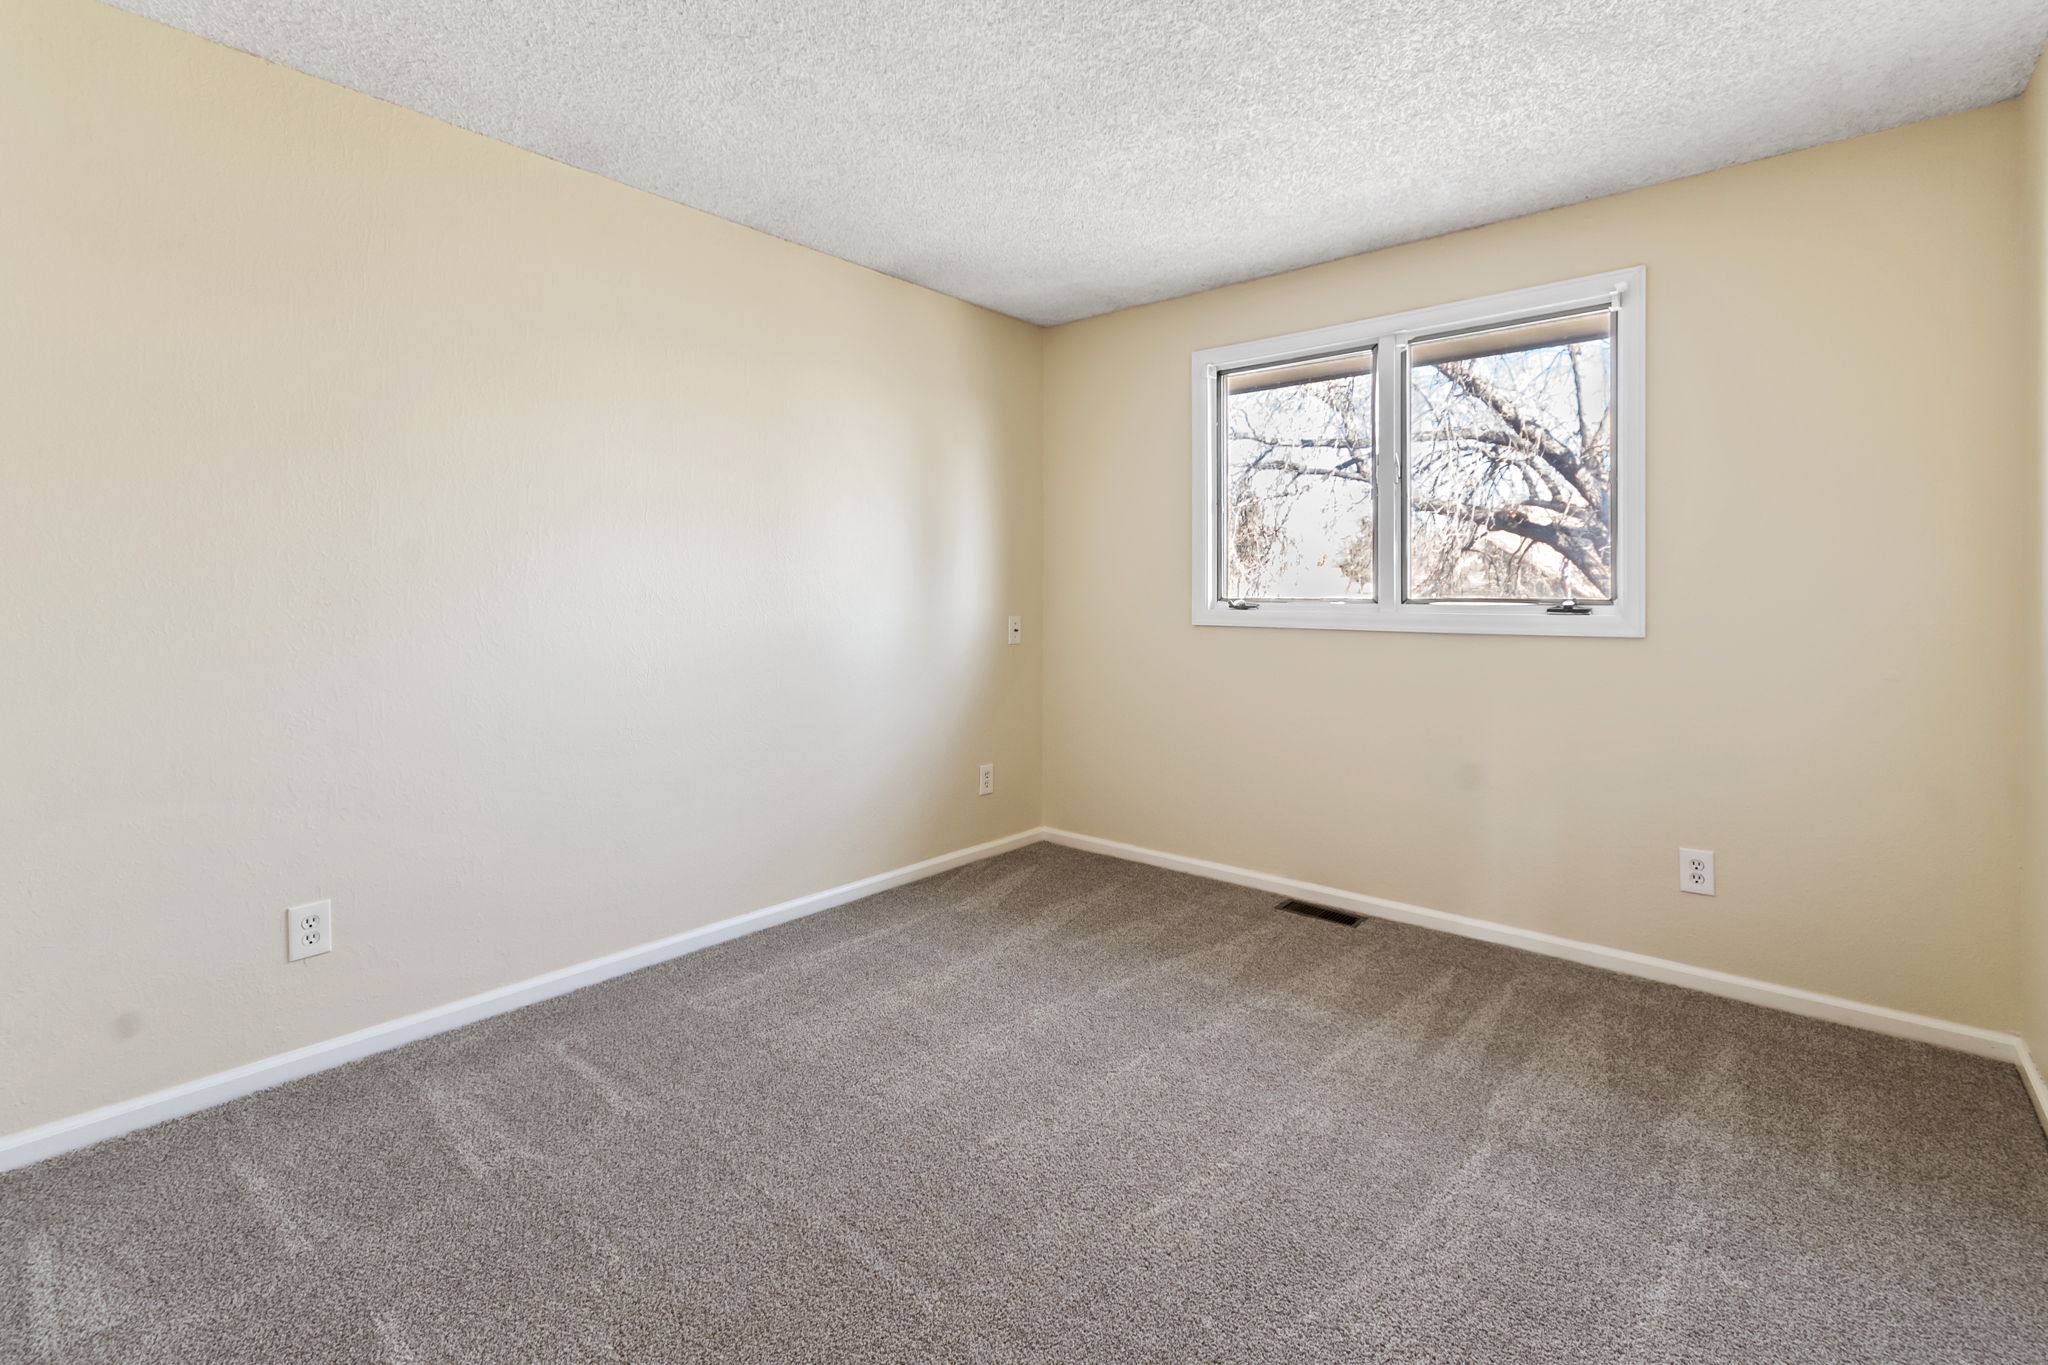  1678 W 115th Cir, Westminster, CO 80234, US Photo 29